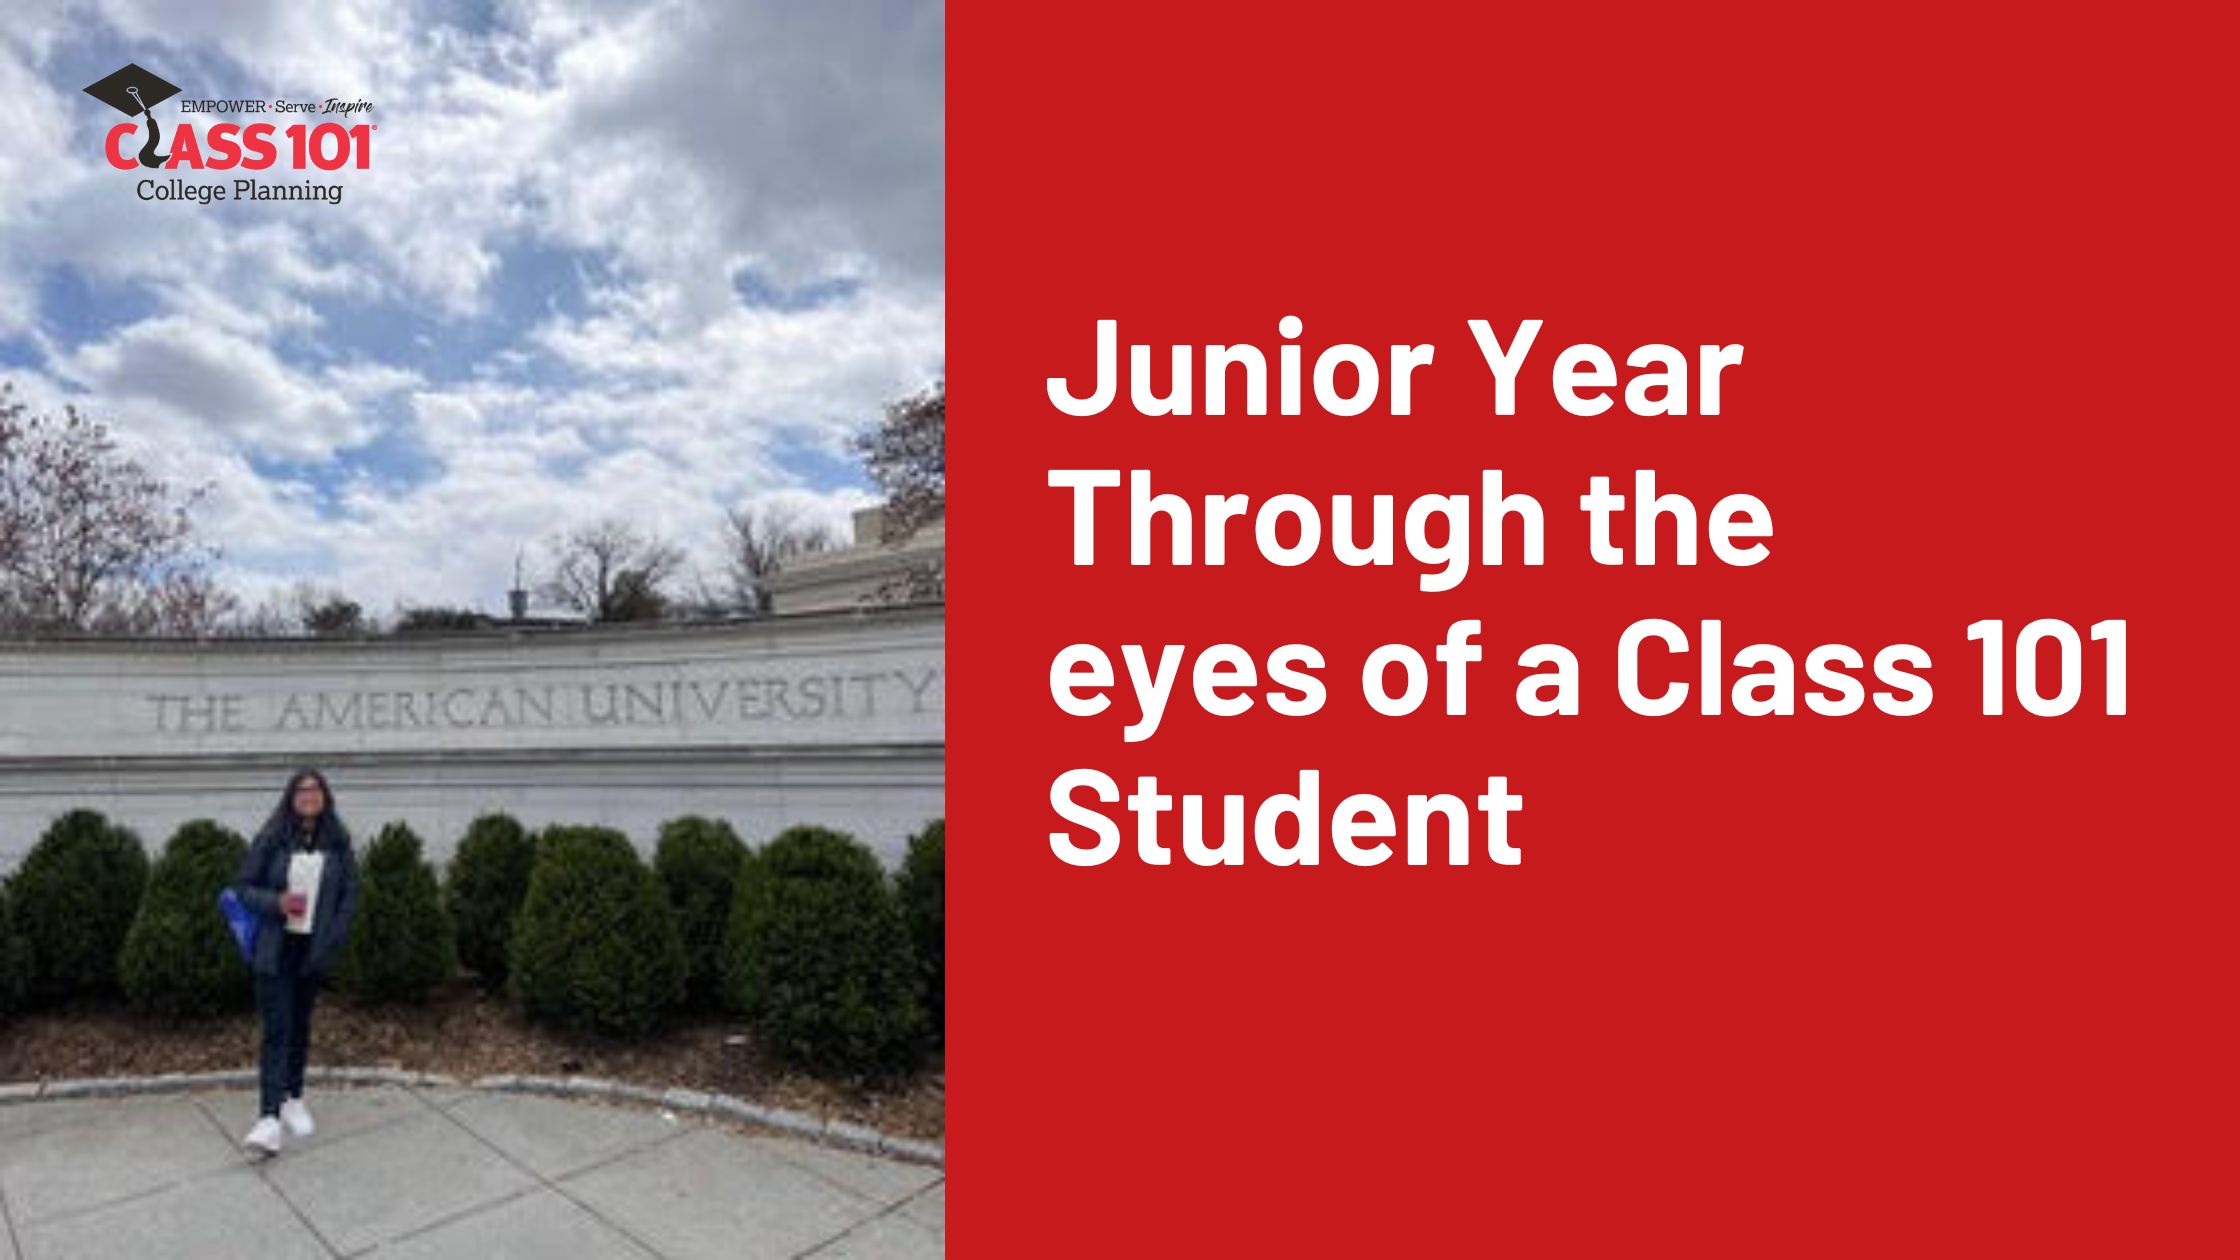 Junior Year Through the eyes of a Class 101 Student!